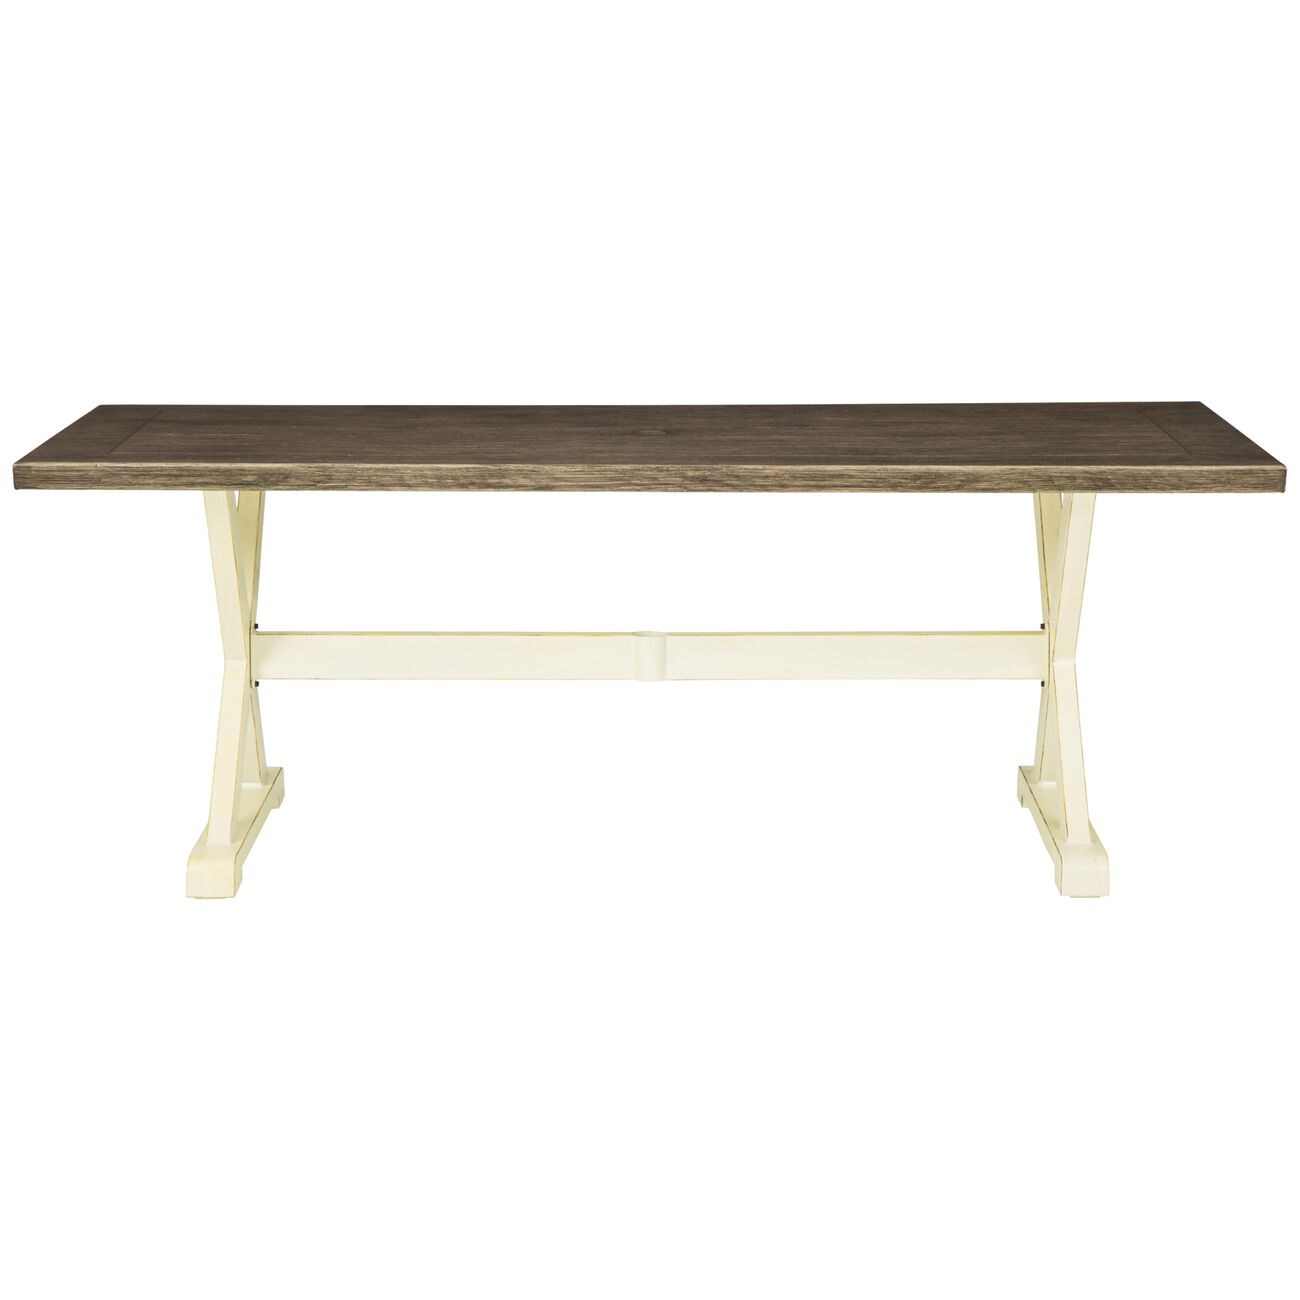 Wood Like Aluminum Frame Dining Table with X Legs, Brown and White